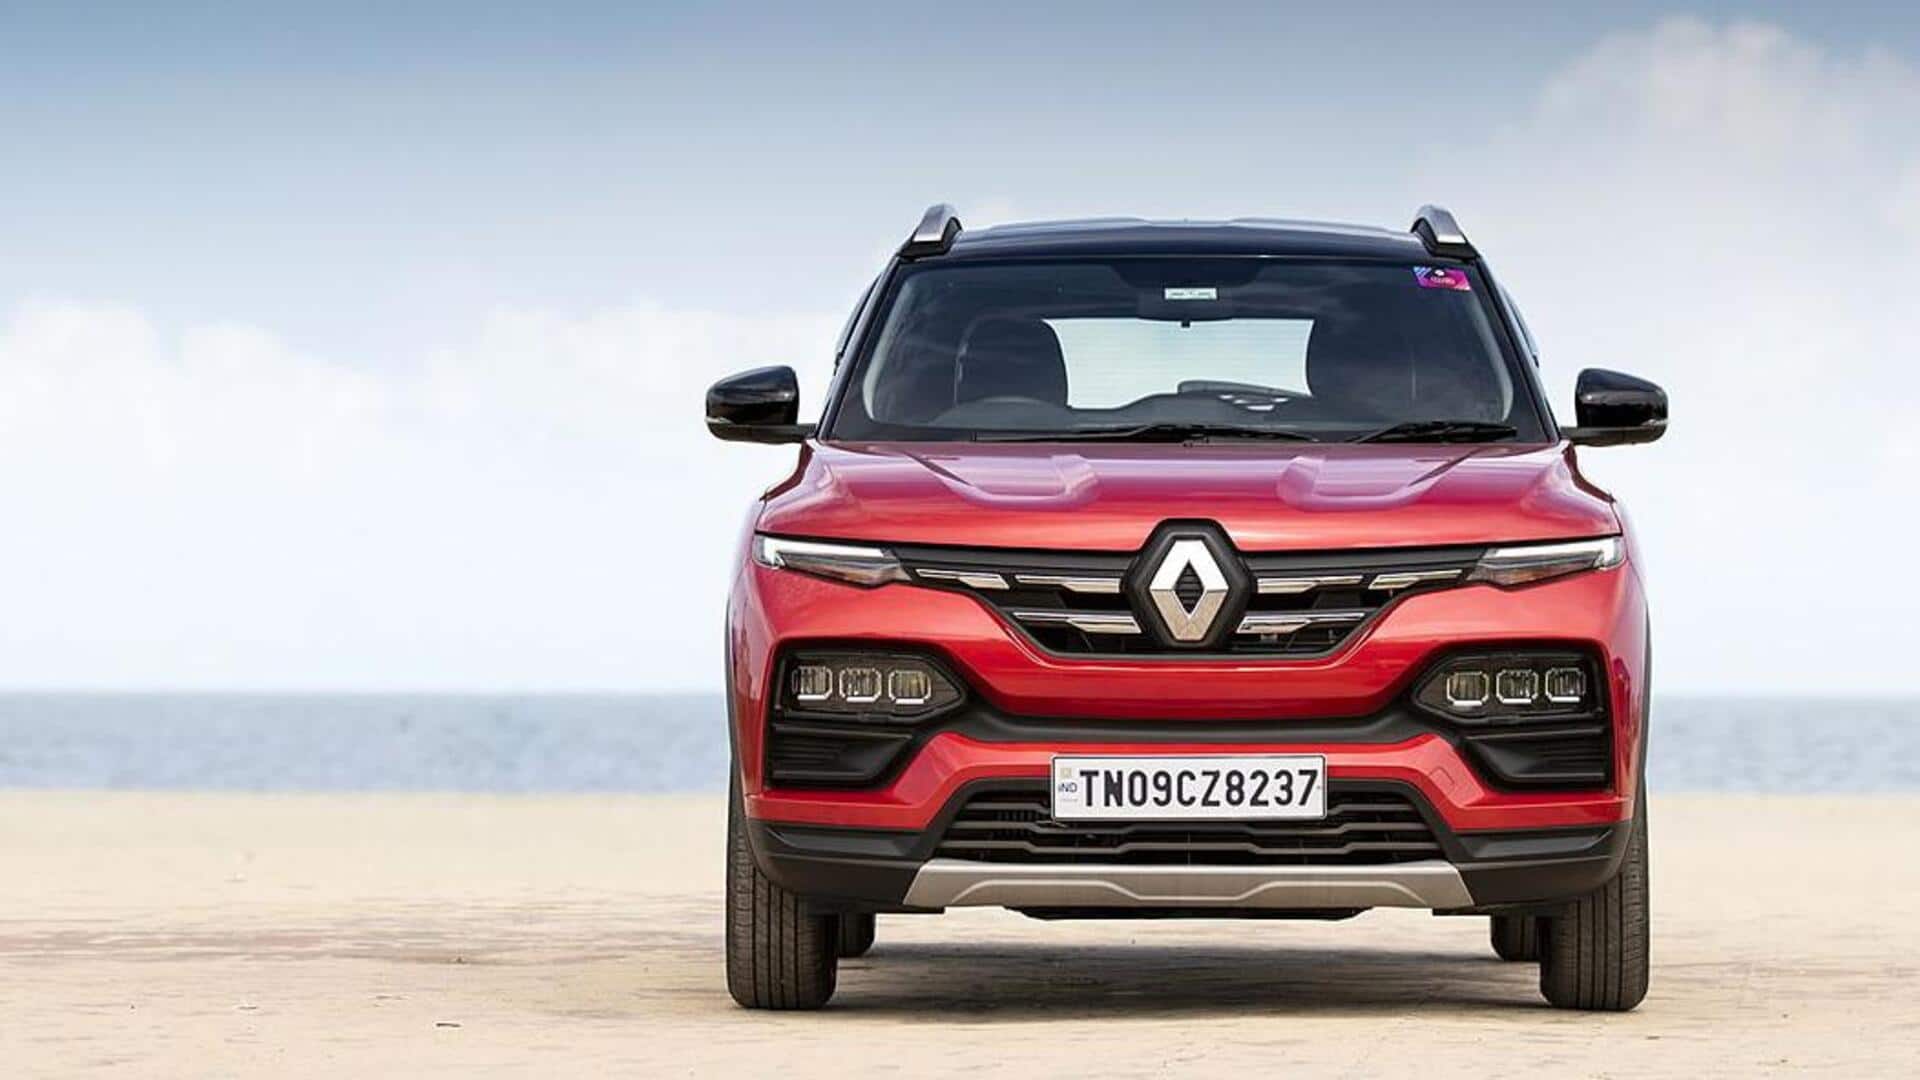 Up to Rs. 65,000 off on Renault cars this Diwali 